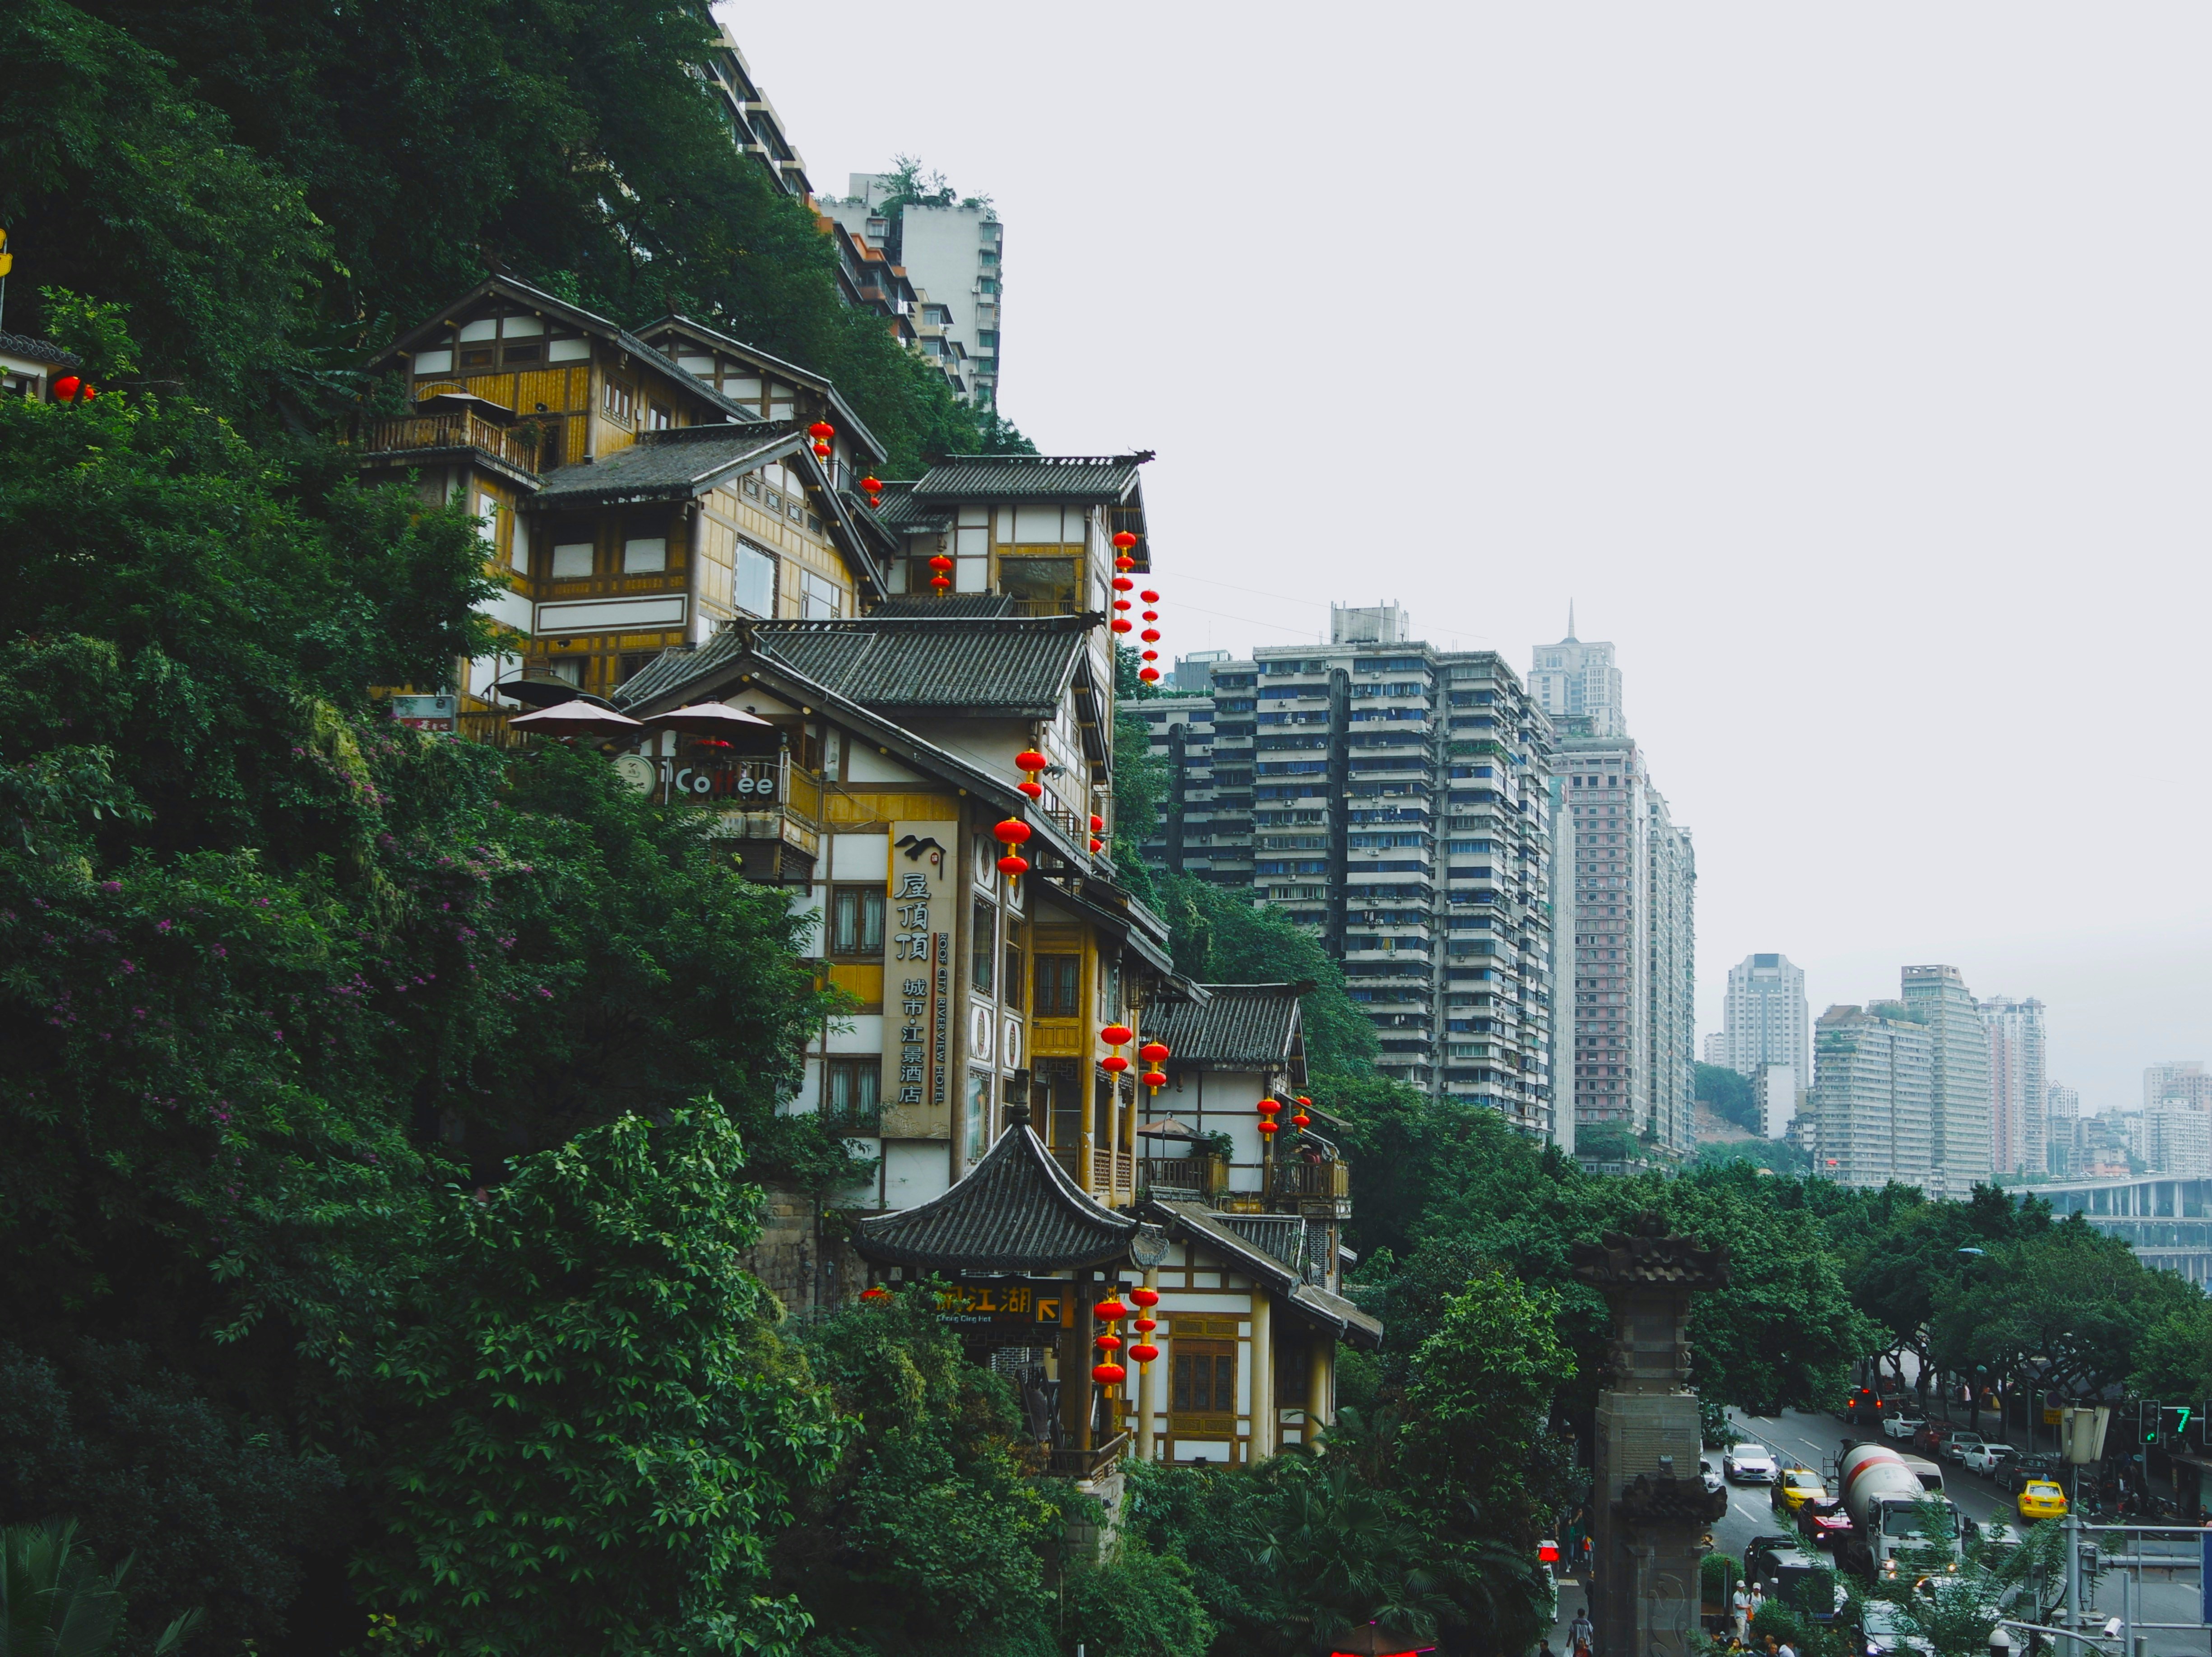 Urban Trees Leaves Flowers Pink Flowers Building Road Truck Car Temple Town ChongQing China 4901x3671